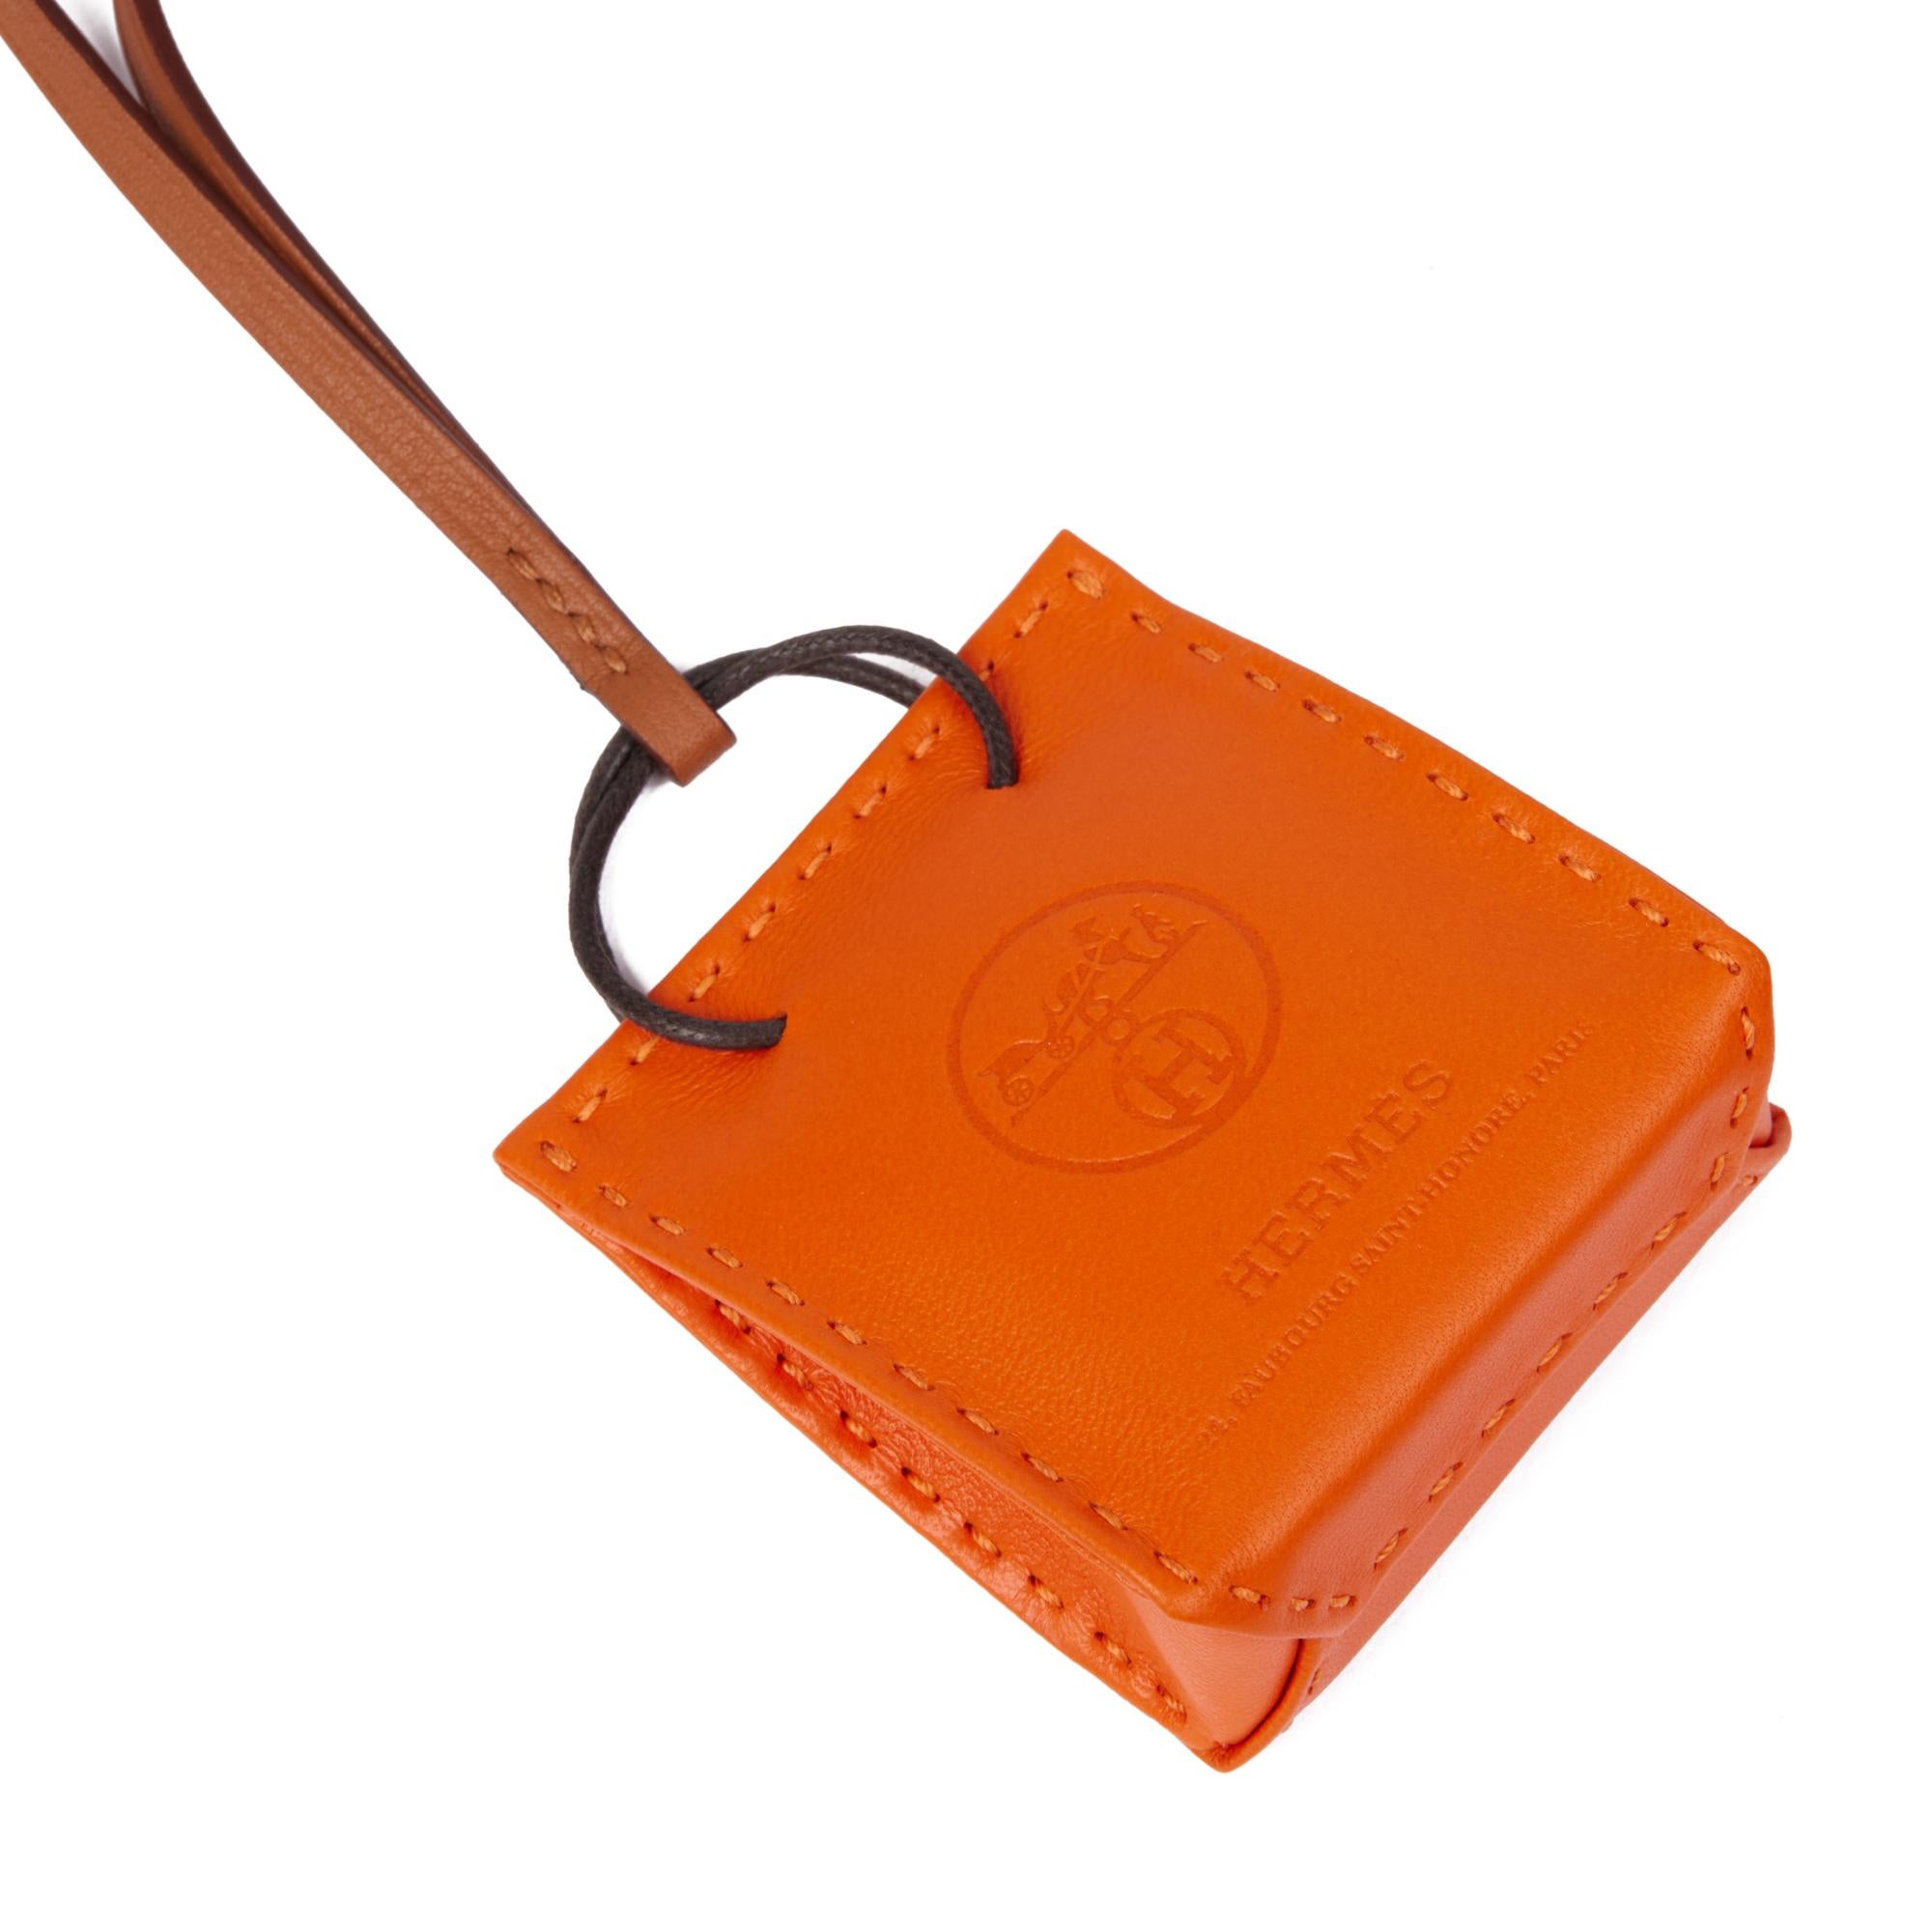 Hermès FUE MILO LAMBSKIN & GOLD SWIFT CALFSKIN LEATHER ORANGE BAG CHARM

CONDITION NOTES
This item is in unworn condition.

BRAND	Hermès
MODEL	Shopping Bag Charm
AGE	2022
GENDER	Women's
MATERIAL(S)	Milo Lambskin Leather, Swift Calfskin